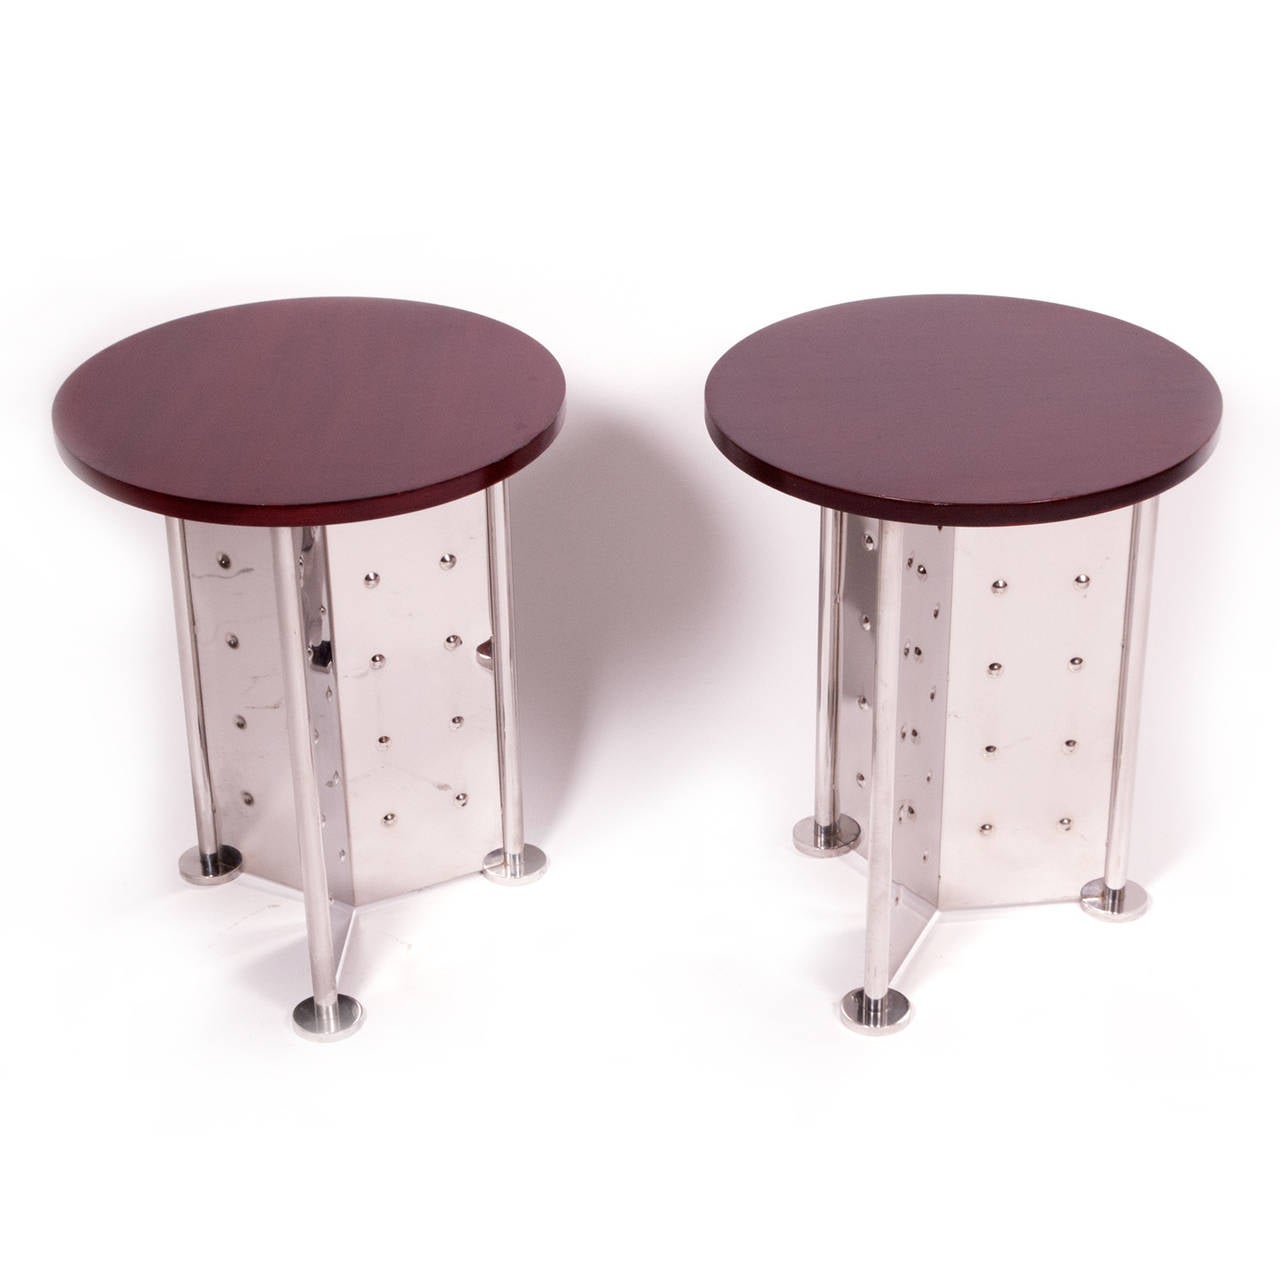 Solid mahogany round tops on stainless steel three-panel base.